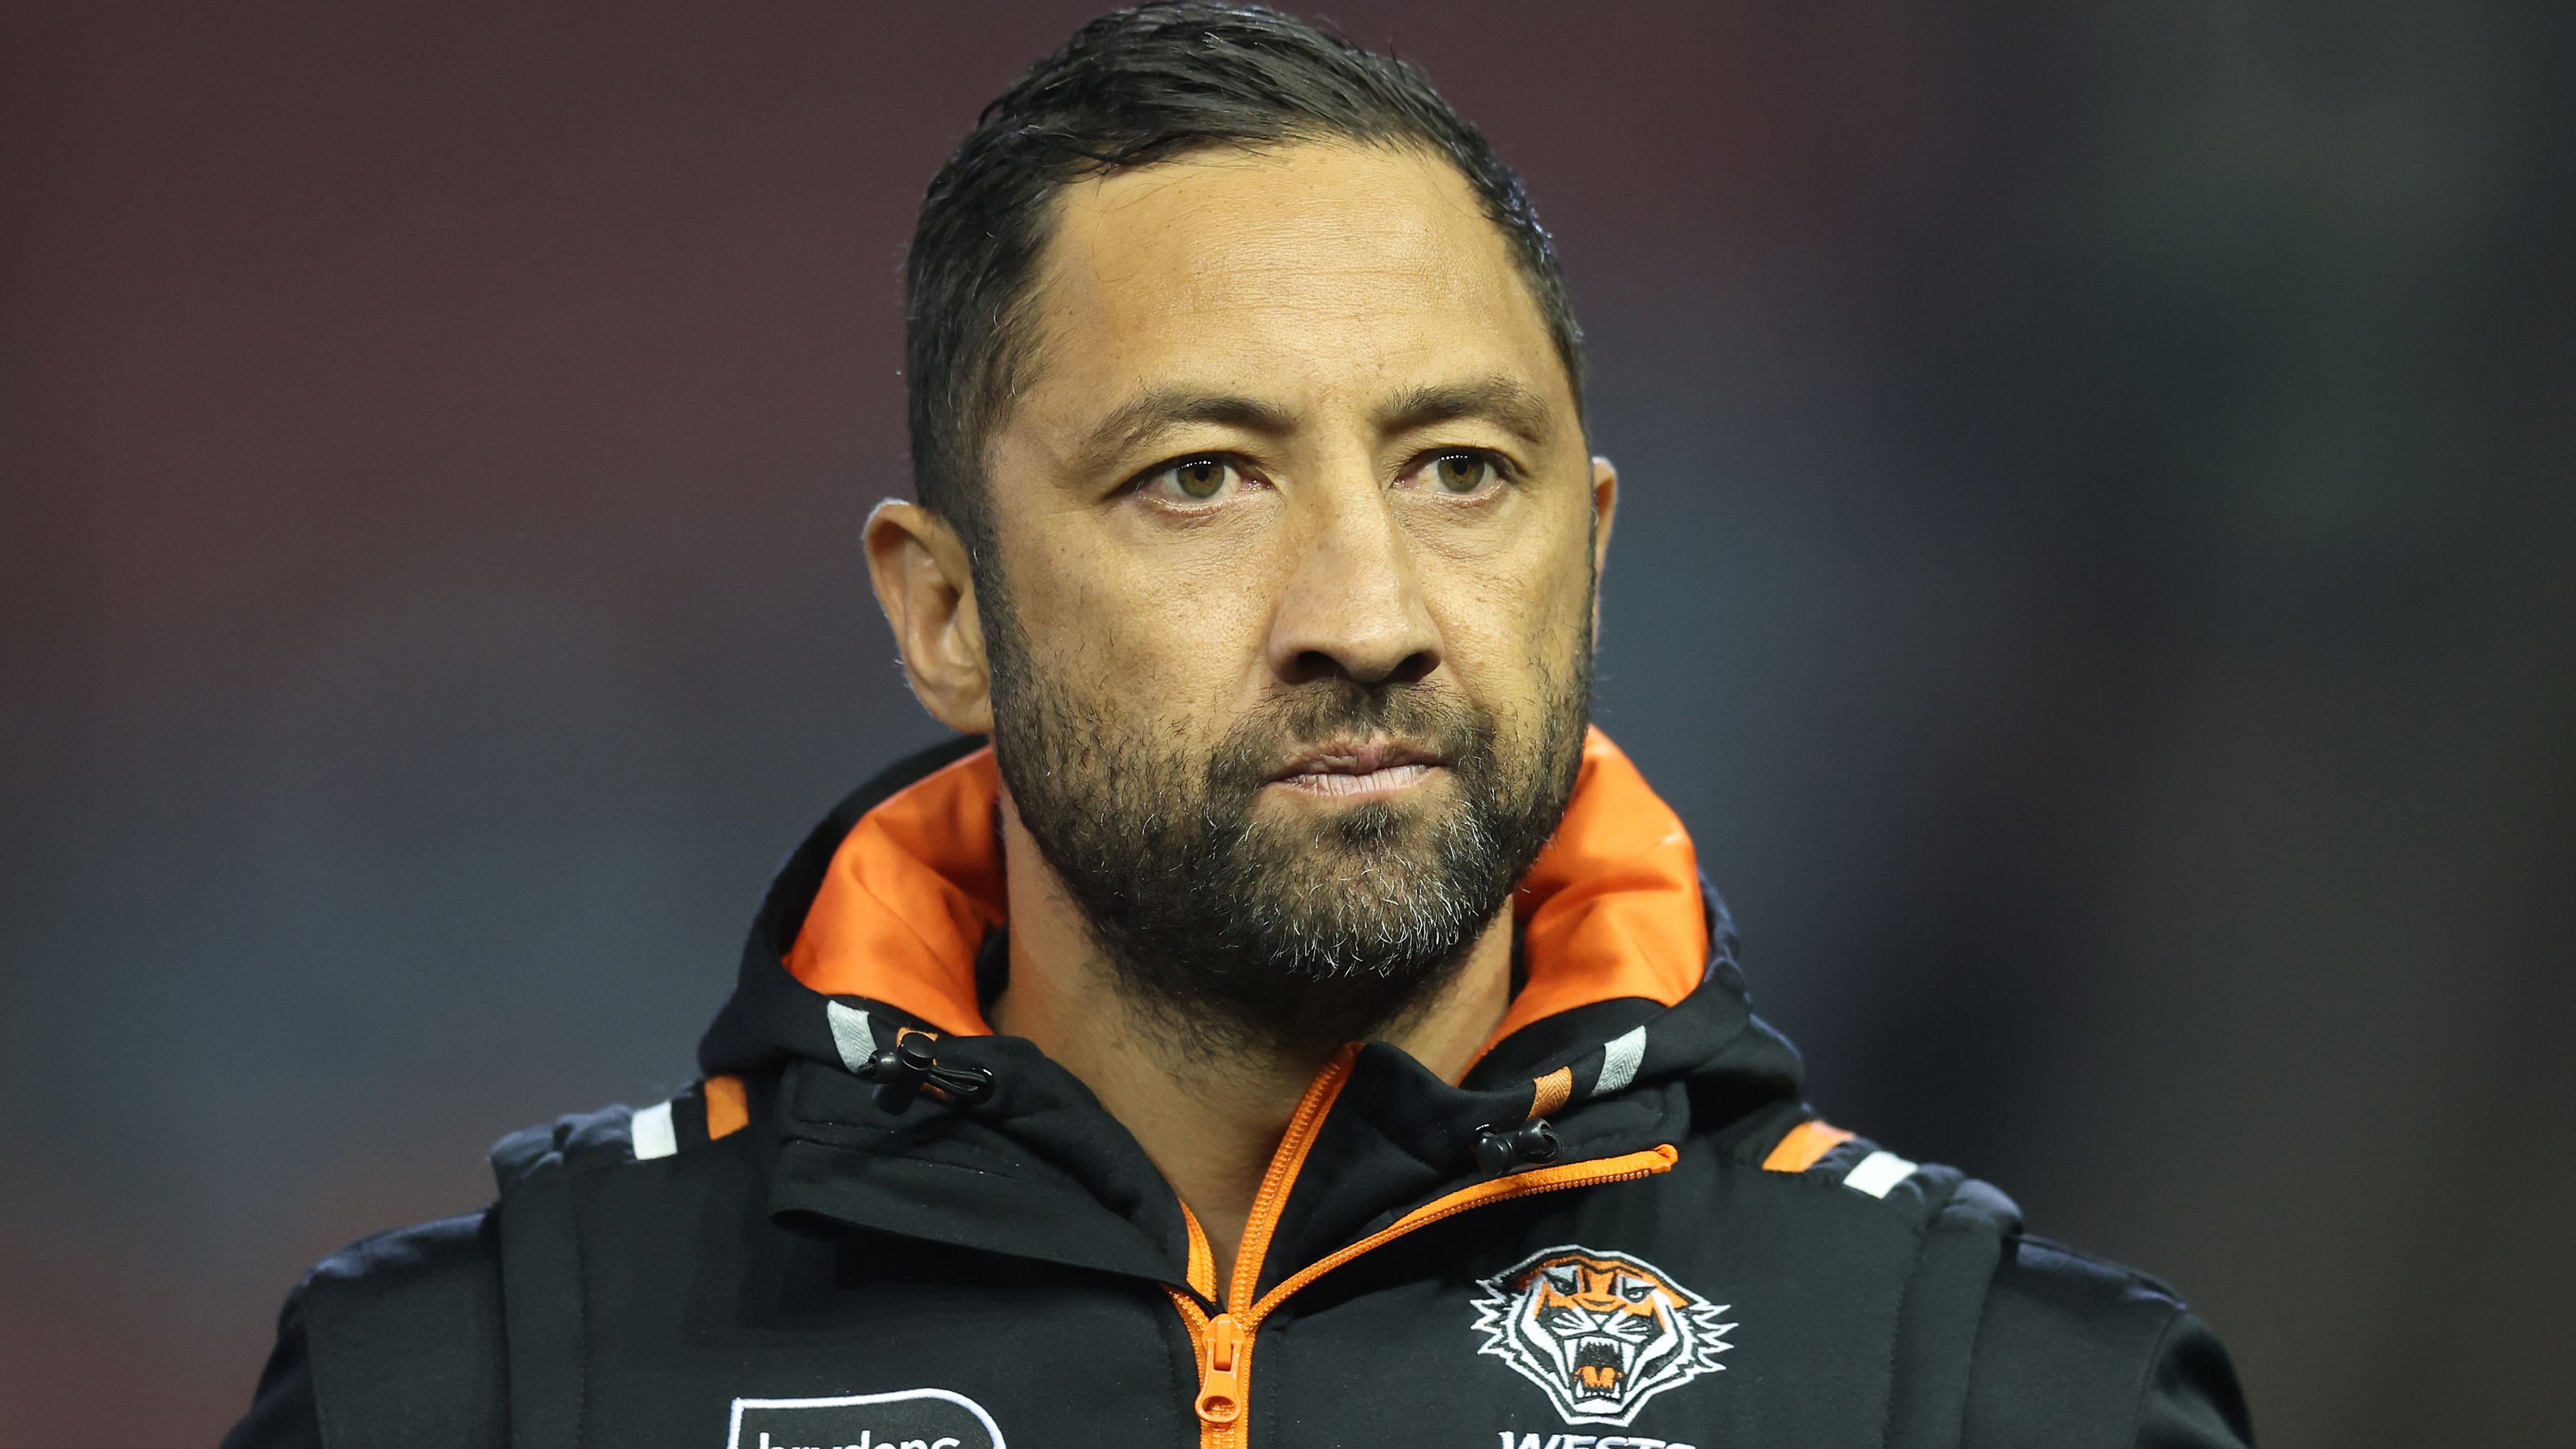 NEWCASTLE, AUSTRALIA - JULY 14: Benji Marshall Assistant Coach of the Tigers pre game during the round 20 NRL match between Newcastle Knights and Wests Tigers at McDonald Jones Stadium on July 14, 2023 in Newcastle, Australia. (Photo by Scott Gardiner/Getty Images)